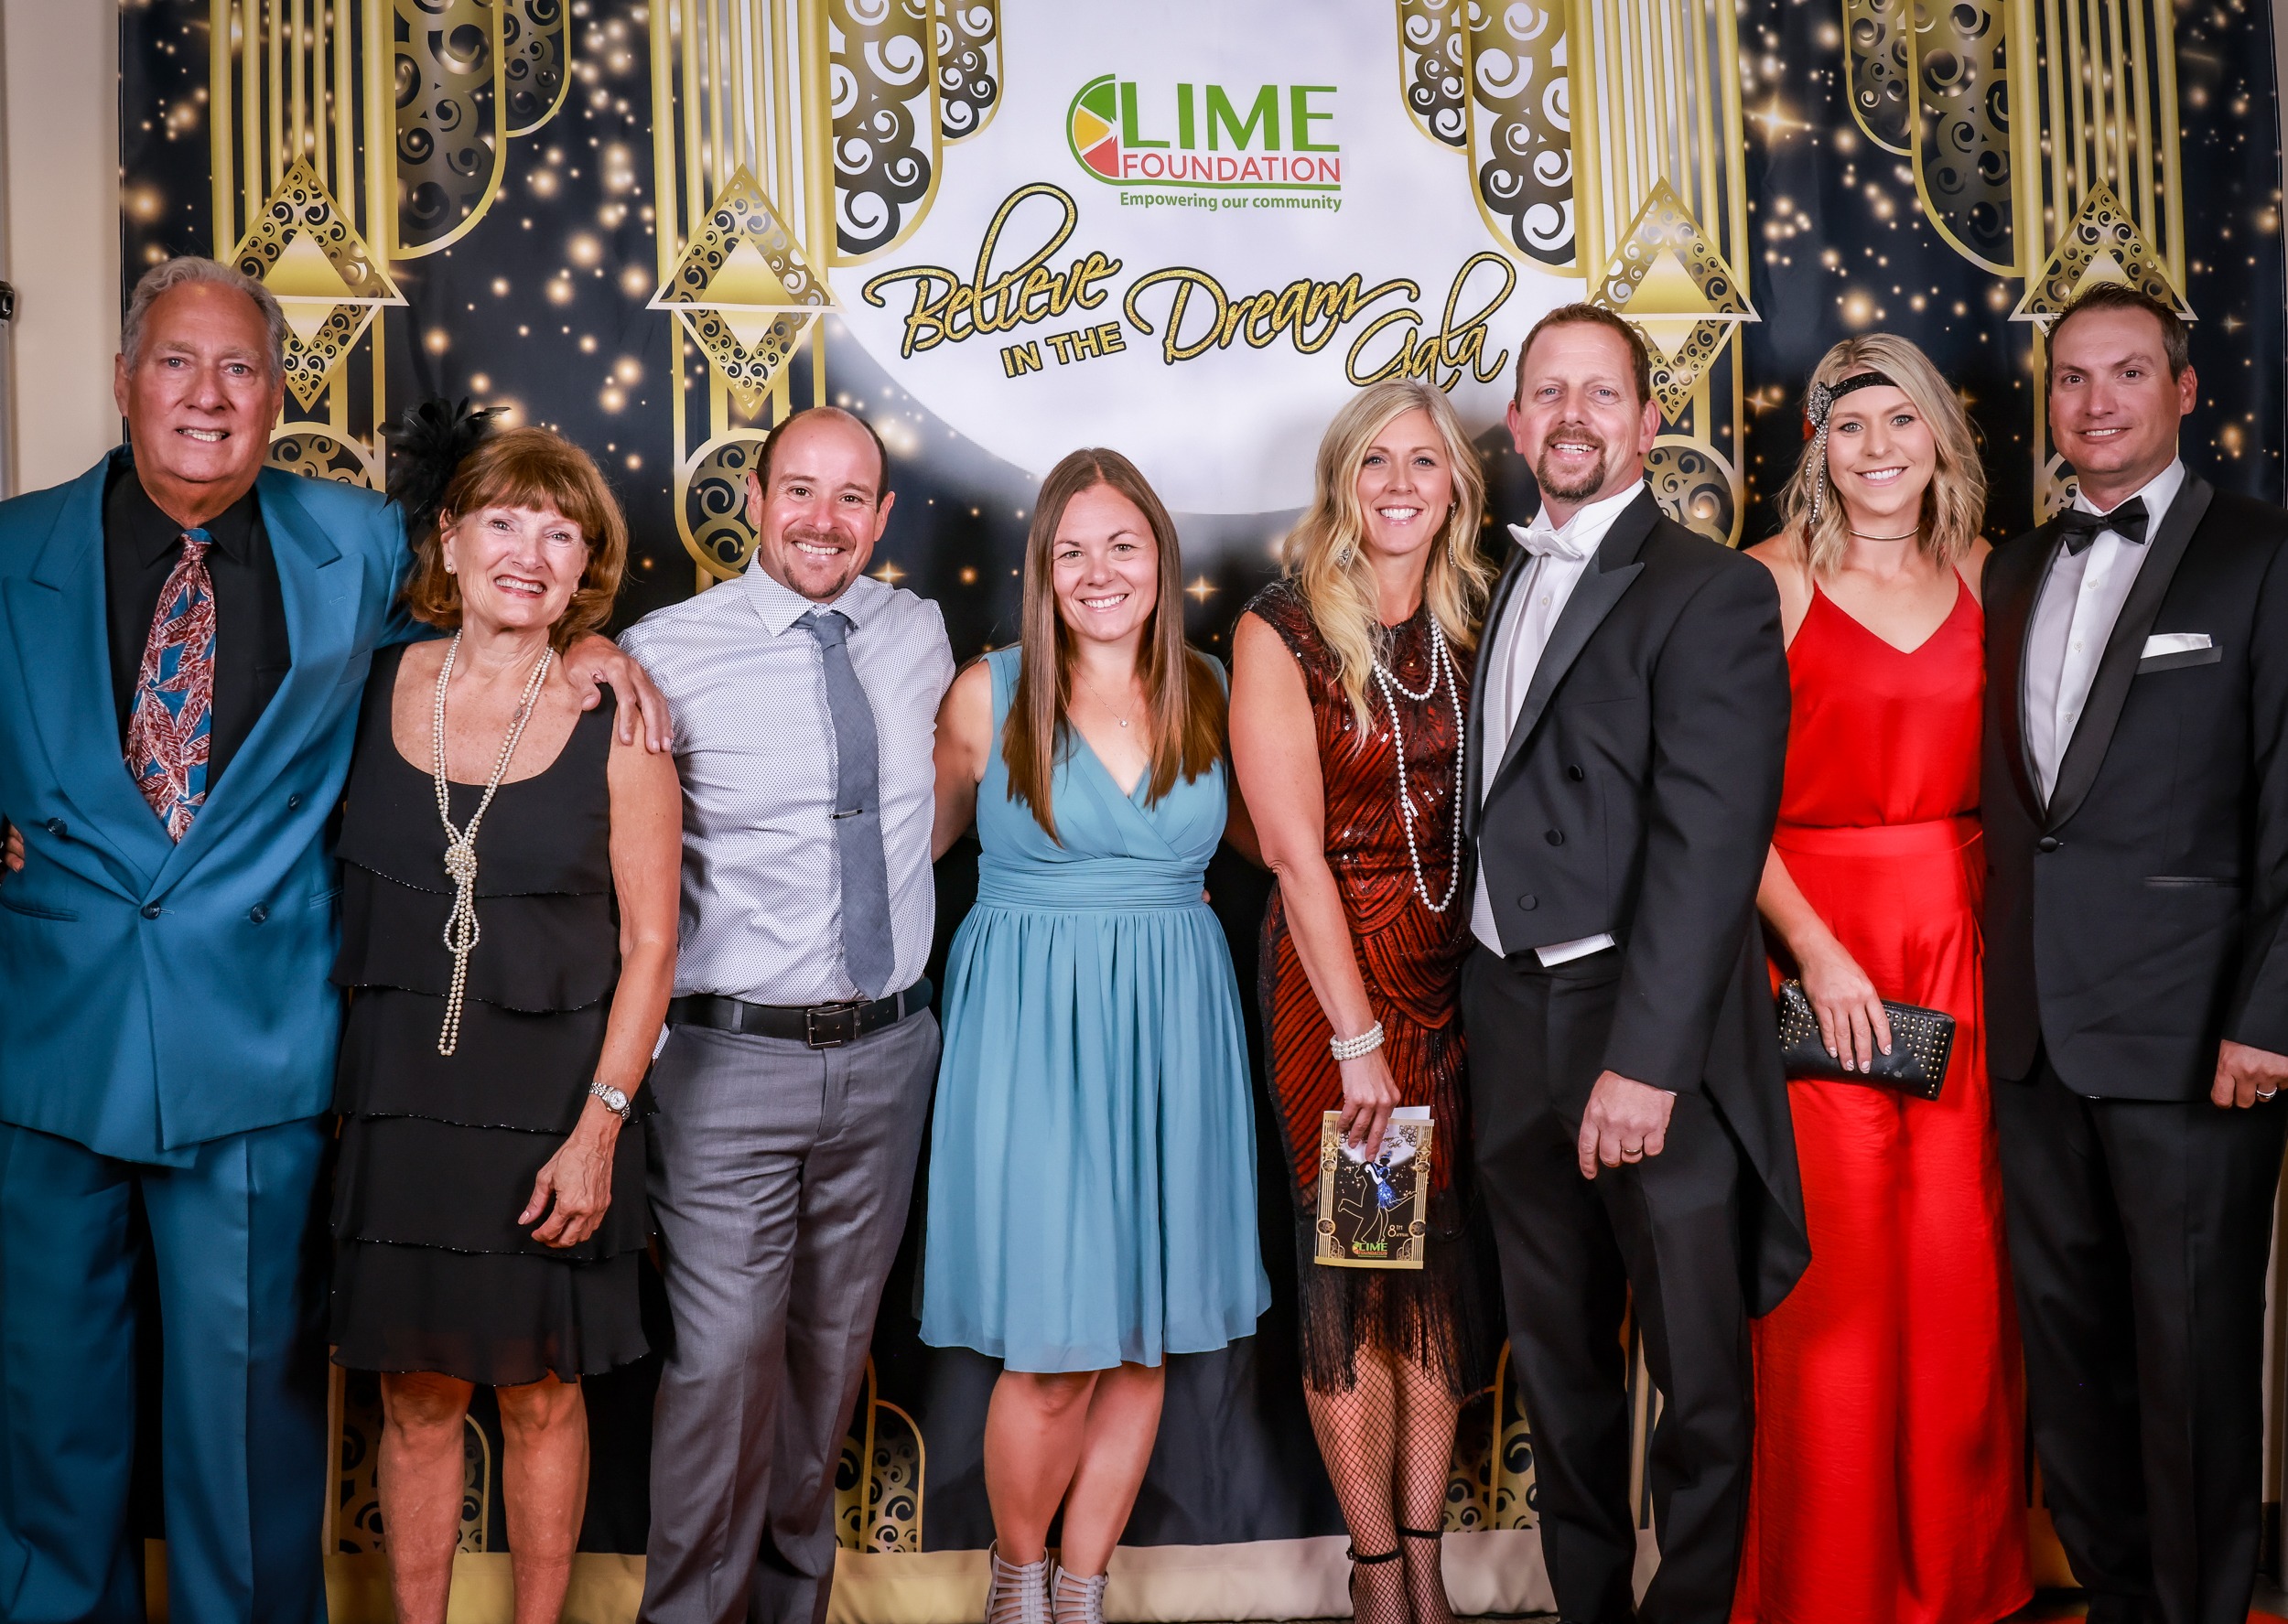 A group of people, including members from The LIME Foundation of Santa Rosa, posing for a photo at an awards ceremony.